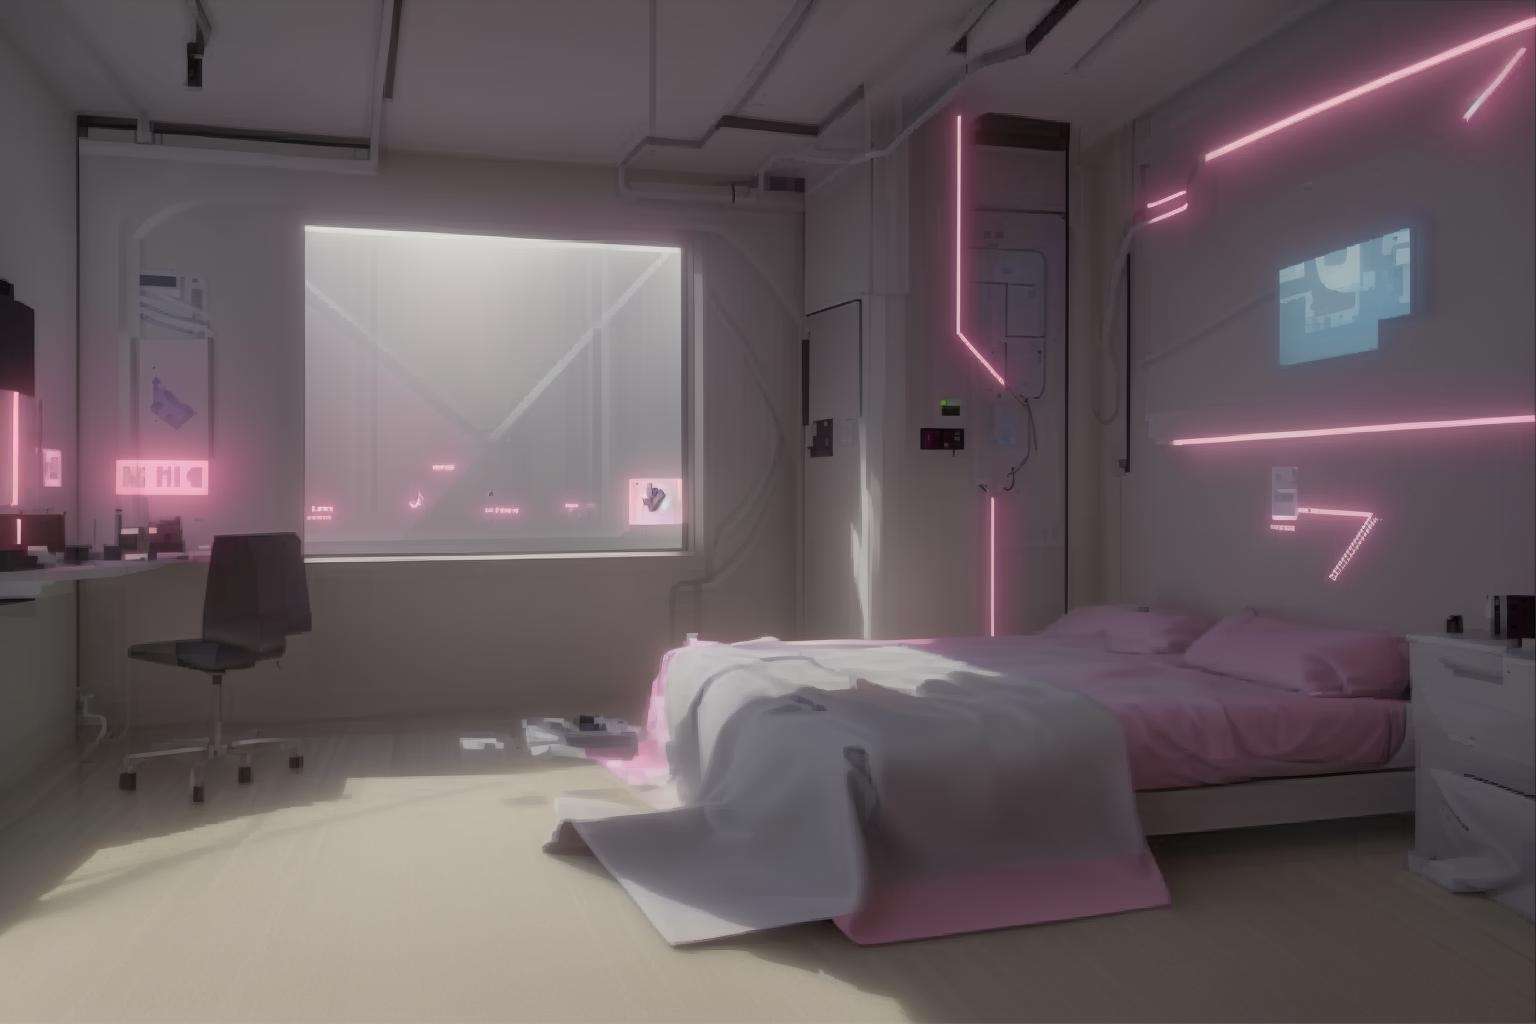 a room with a large window and a bed in it with a shocking-pink sheet on the floor and a slate-grey line on the wall, Filip Hodas, cgstudio, computer graphics, space art , cyber_room  , cyberpunk ambient, a room